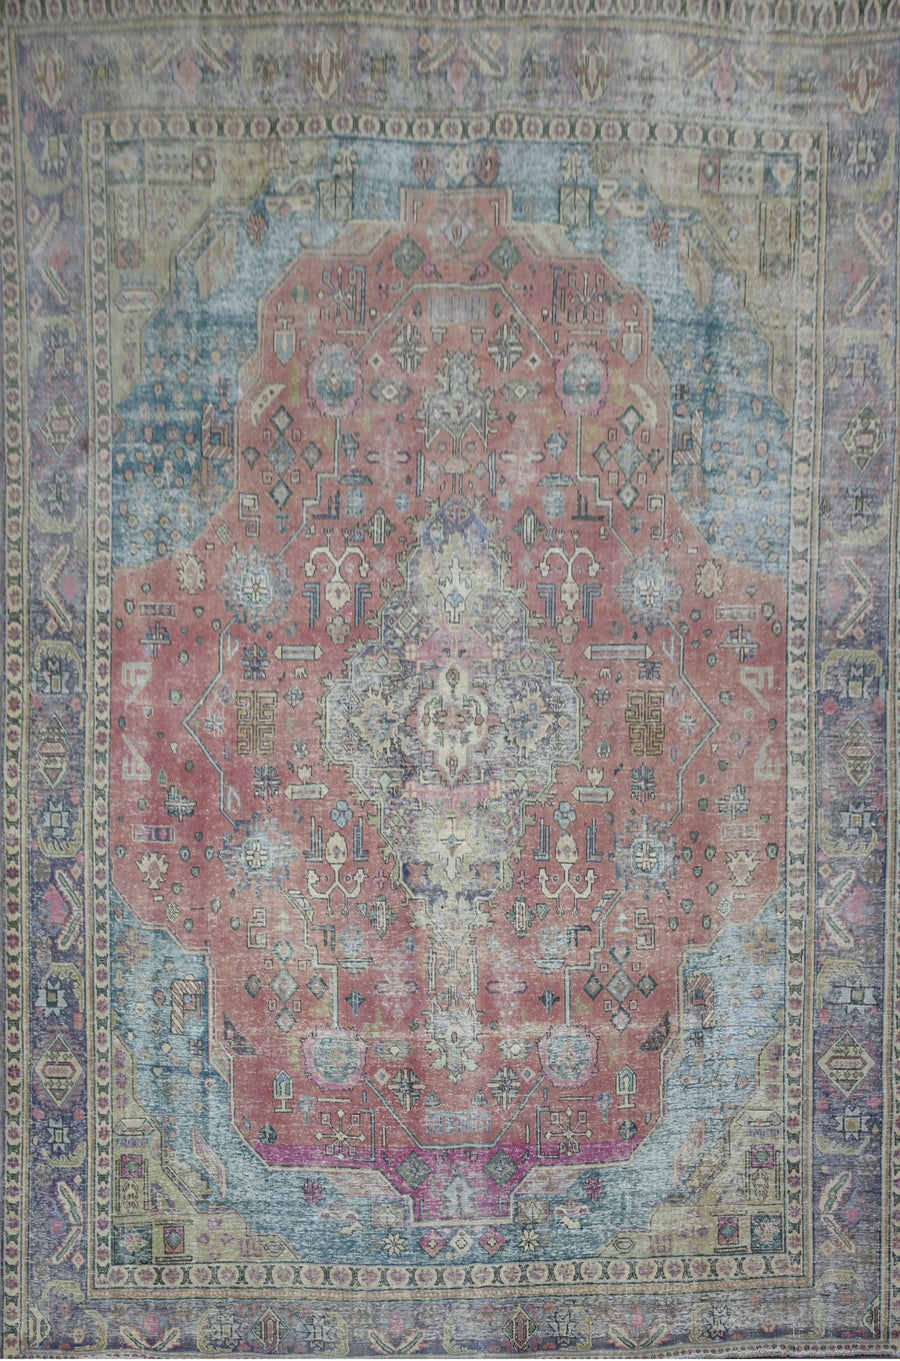 9x12 ft Hand-Knotted Vintage Wool Rug Eastleigh